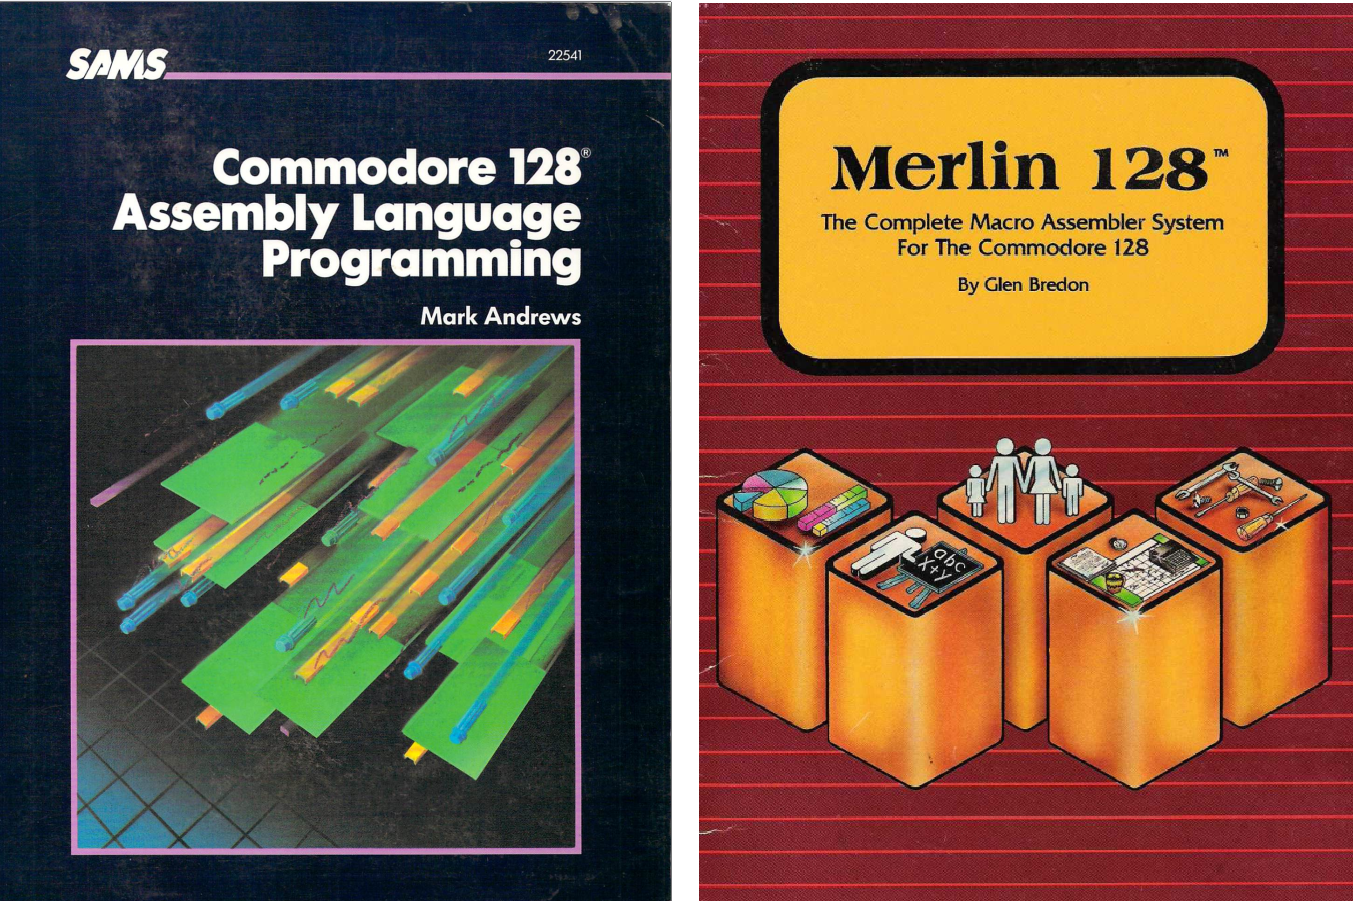 Coding with Merlin 128 & Sams Book | Episode 5